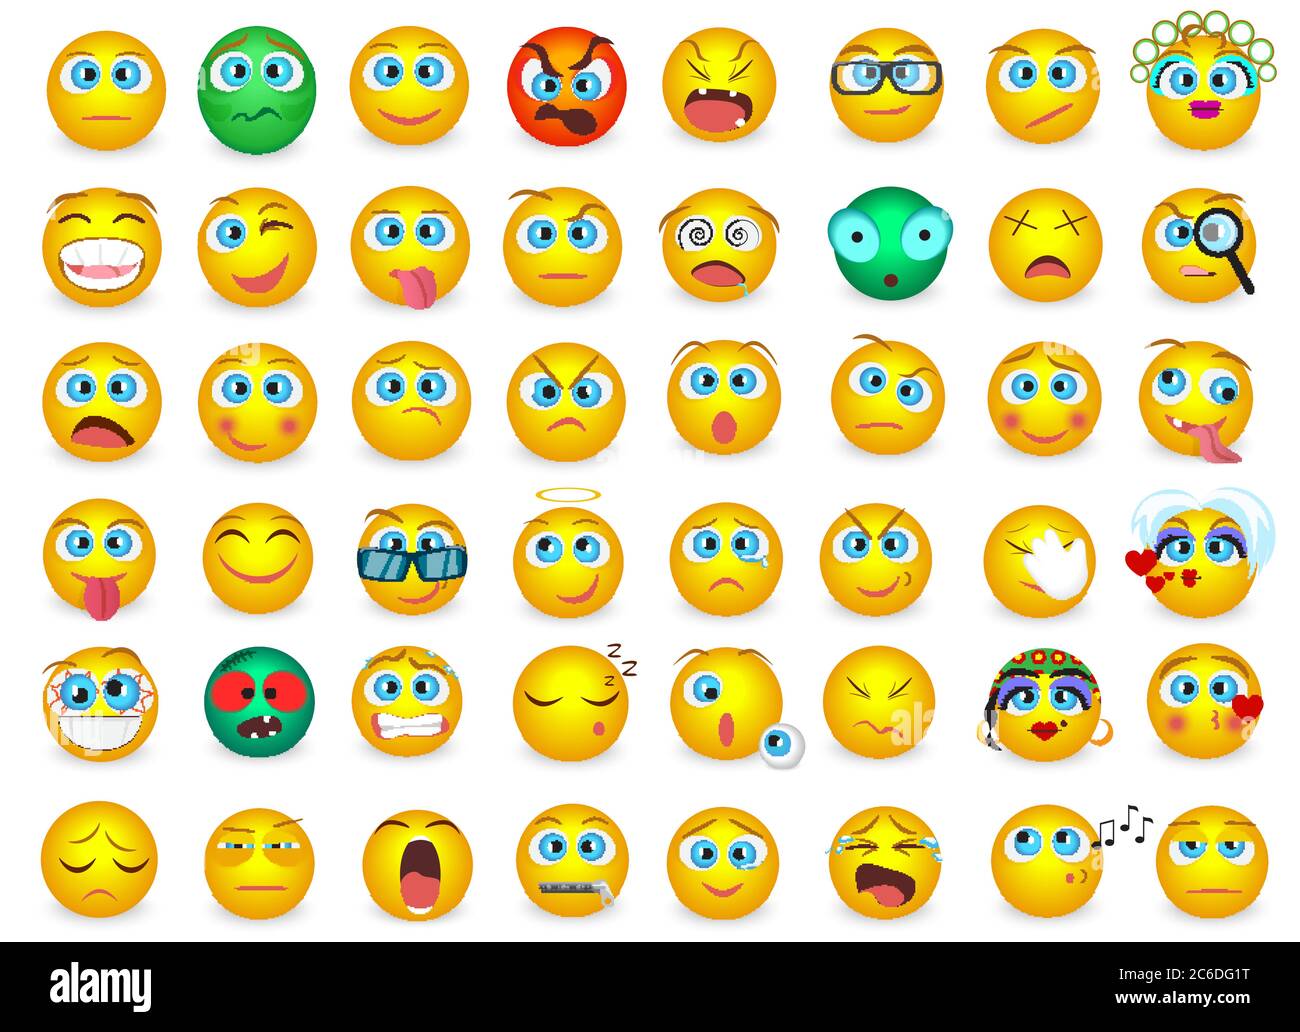 Mega big collection set of Emoji face emotion icons isolated. Vector illustration Stock Vector